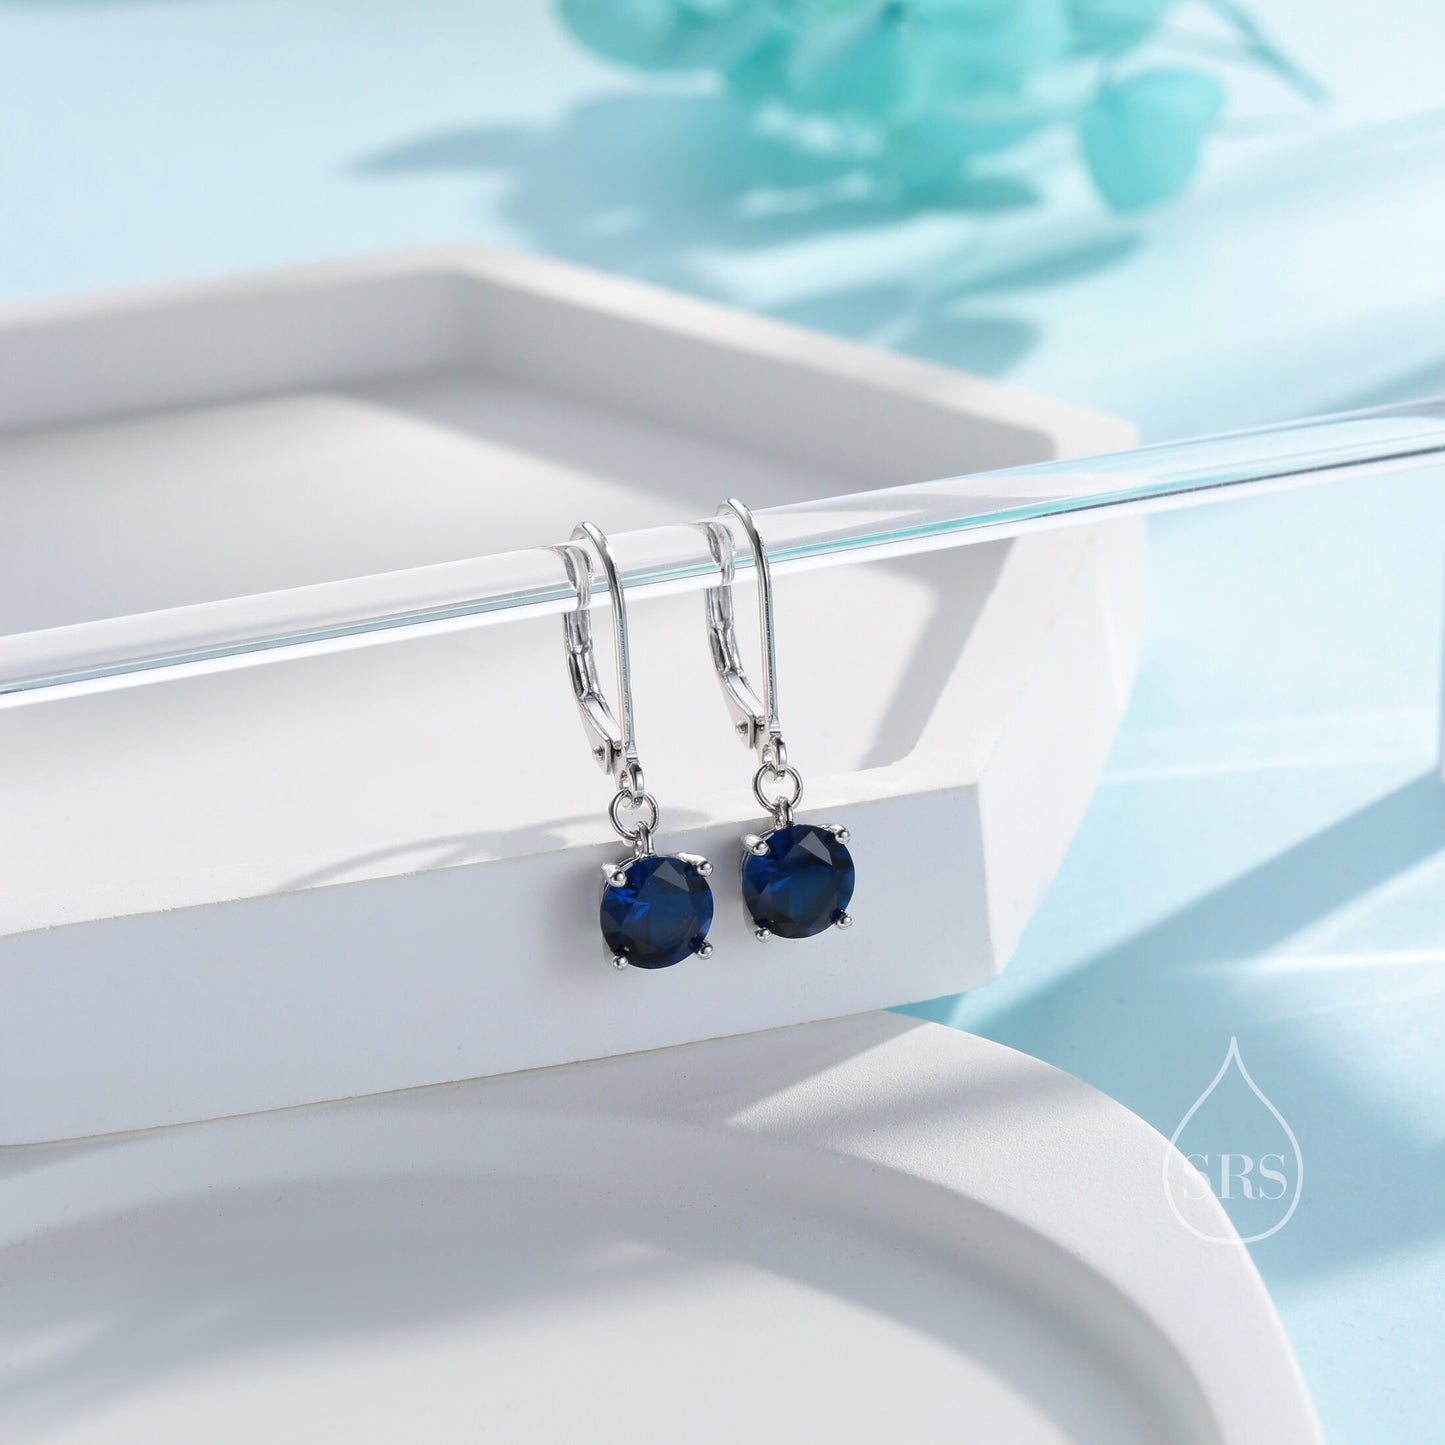 Sapphire Blue CZ Lever Back Hoop in Sterling Silver, 2 Sizes Available, 6mm or 6.5mm, Minimalist Simple Crystal Leverback Hoop Earrings